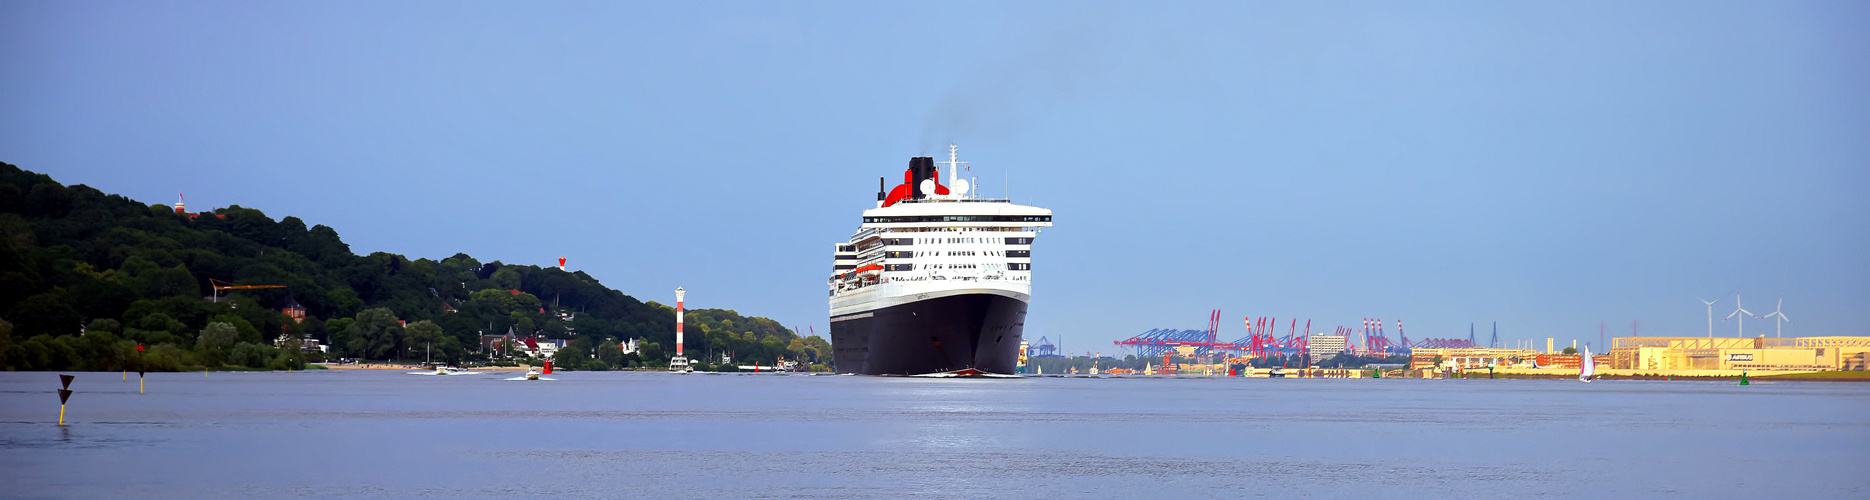 Queen Mary 2 -